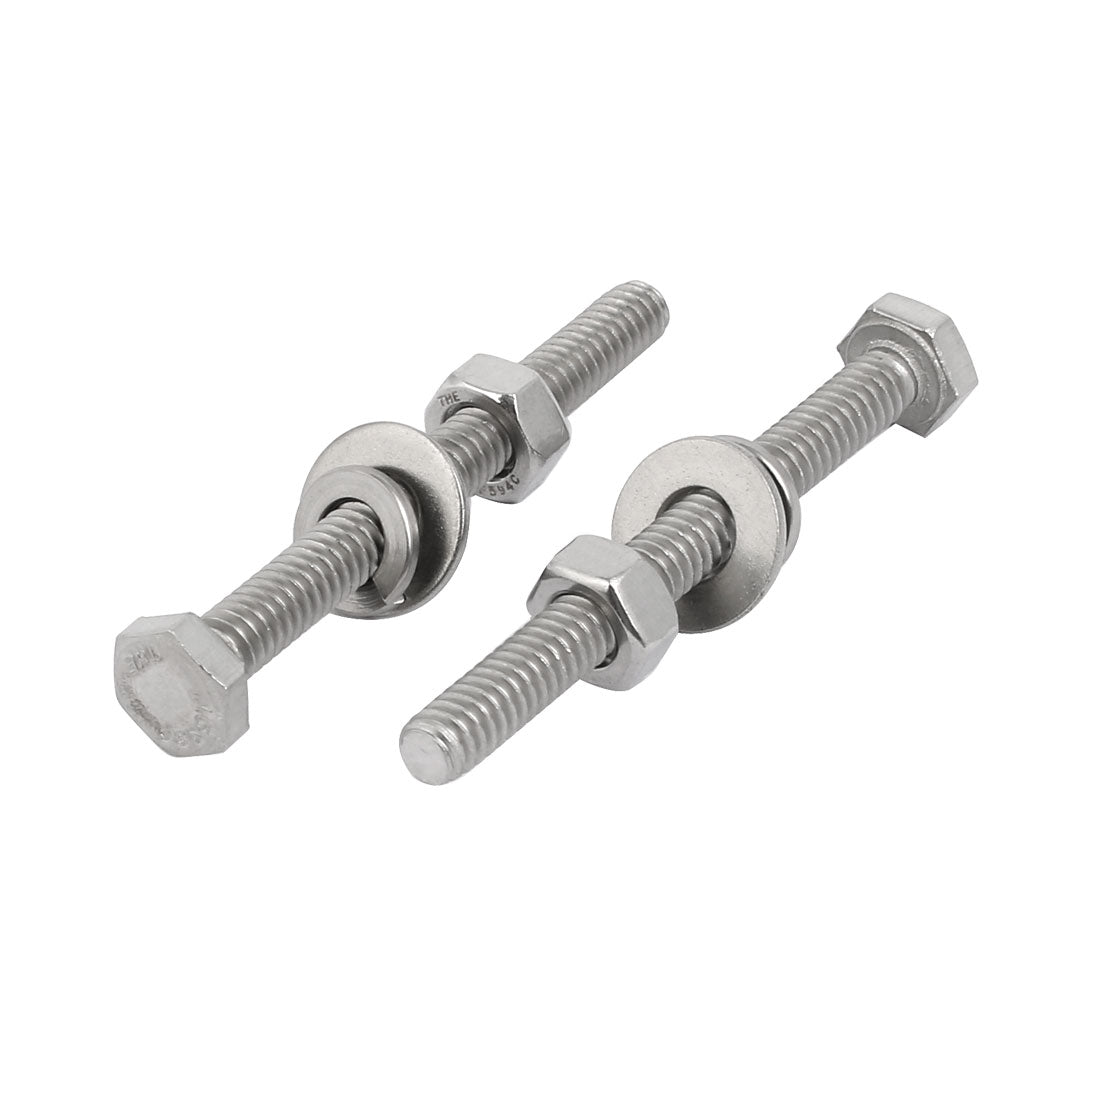 uxcell Uxcell 10 Set 304 Stainless Steel 1/4"-20 Thread 3" Length Hex Bolt Kit w Washer Nut